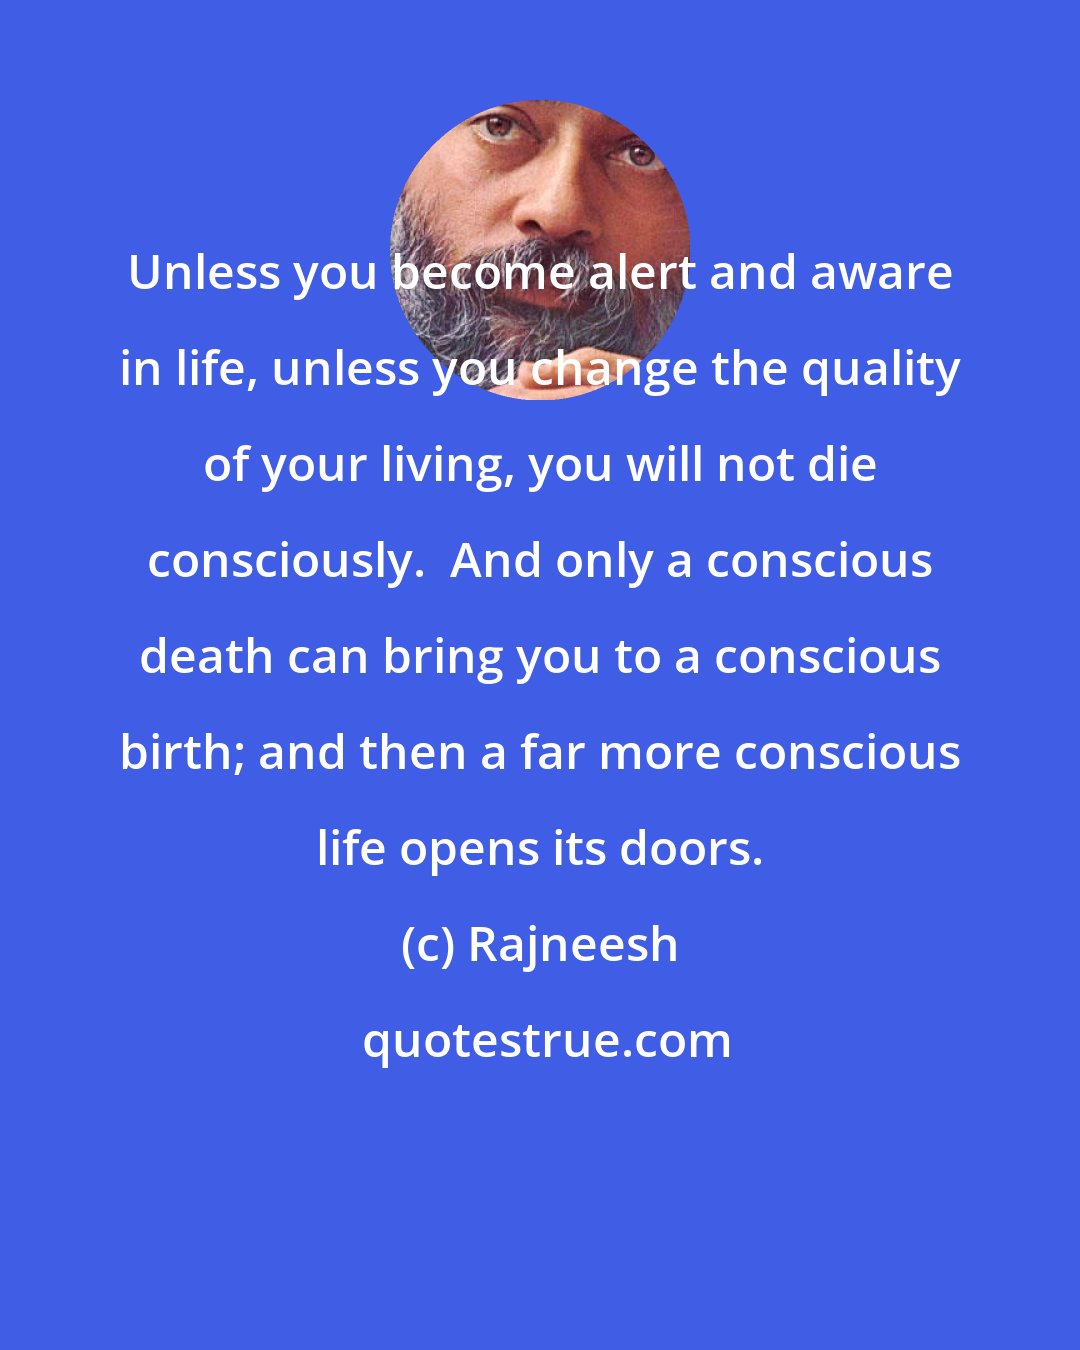 Rajneesh: Unless you become alert and aware in life, unless you change the quality of your living, you will not die consciously.  And only a conscious death can bring you to a conscious birth; and then a far more conscious life opens its doors.